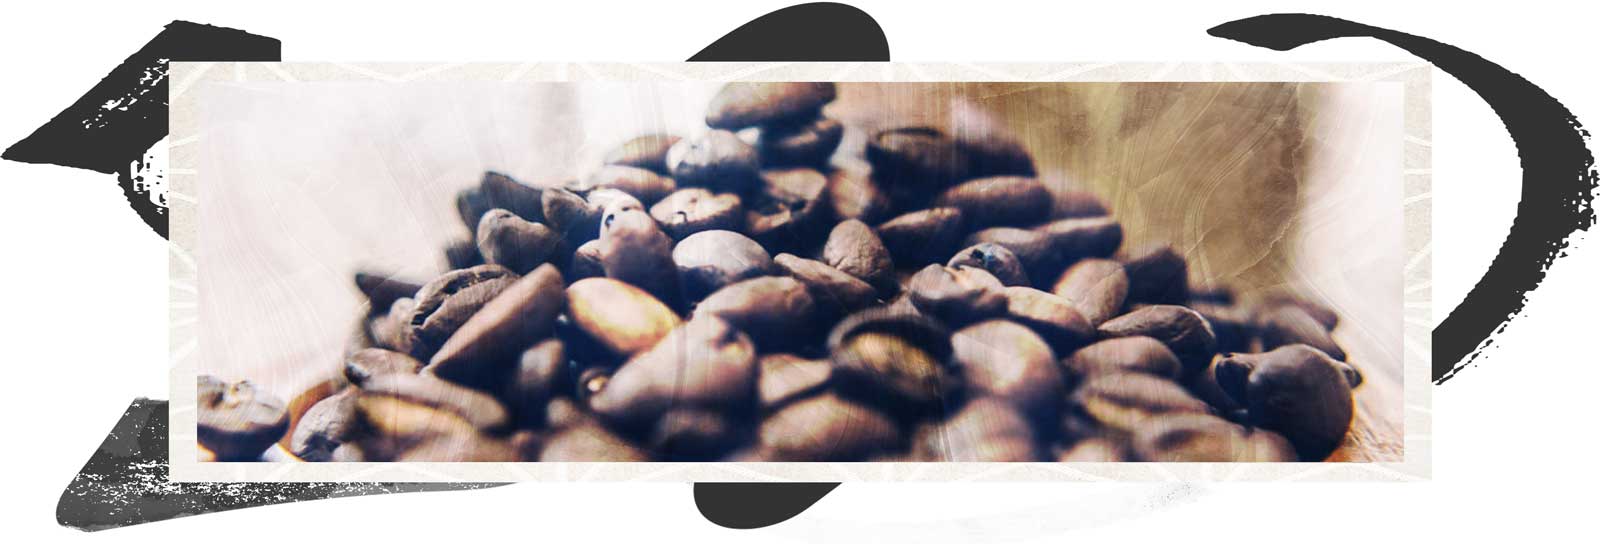 Signature Blended Coffee Beans